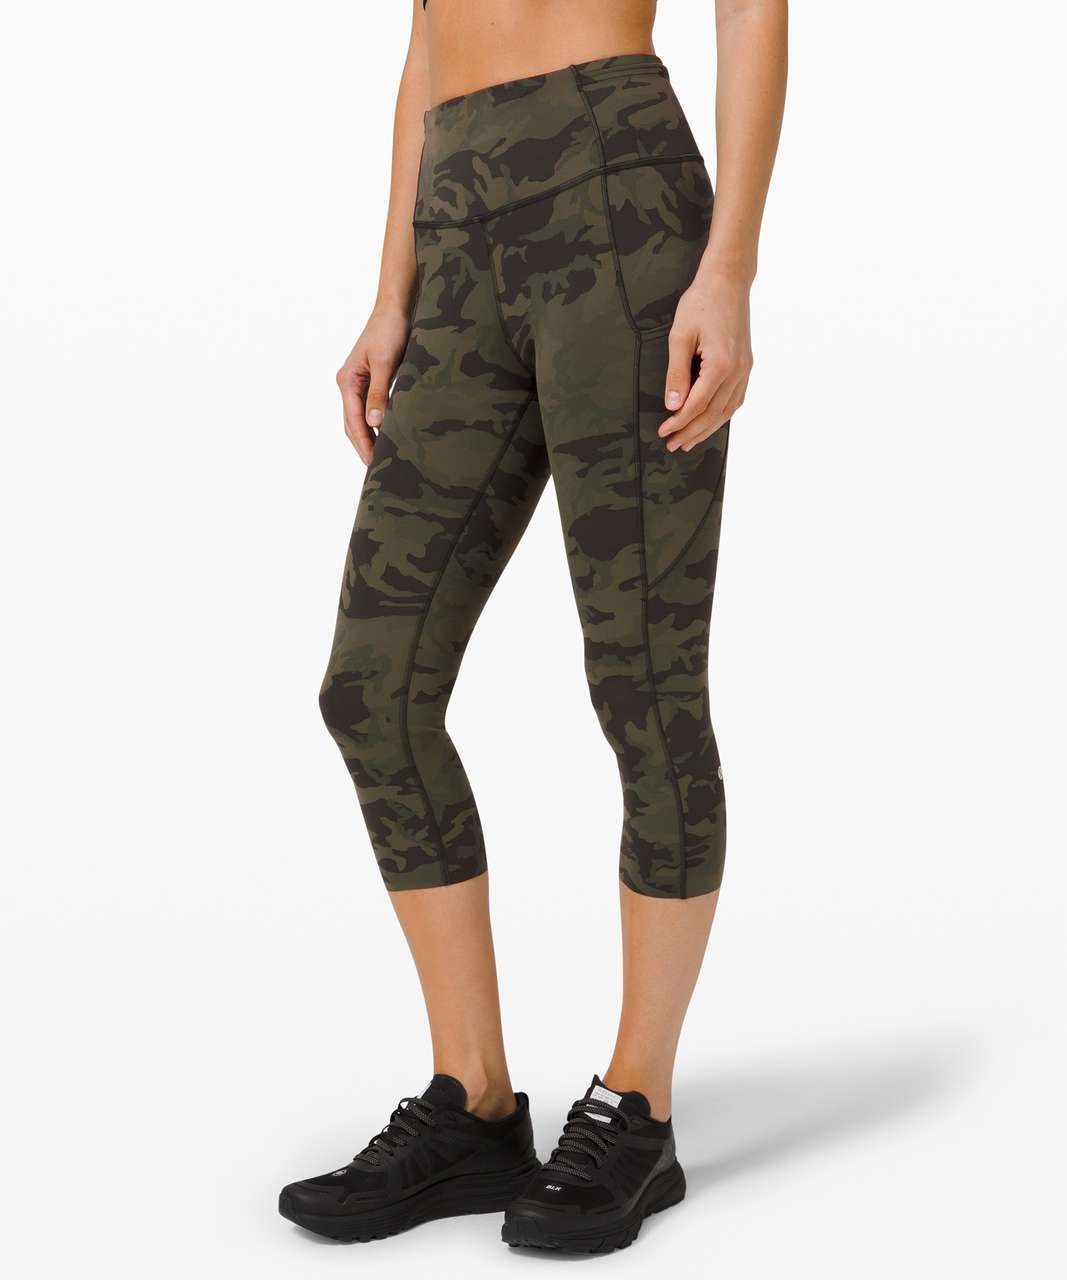 Lululemon Camo Pants Mens  International Society of Precision Agriculture